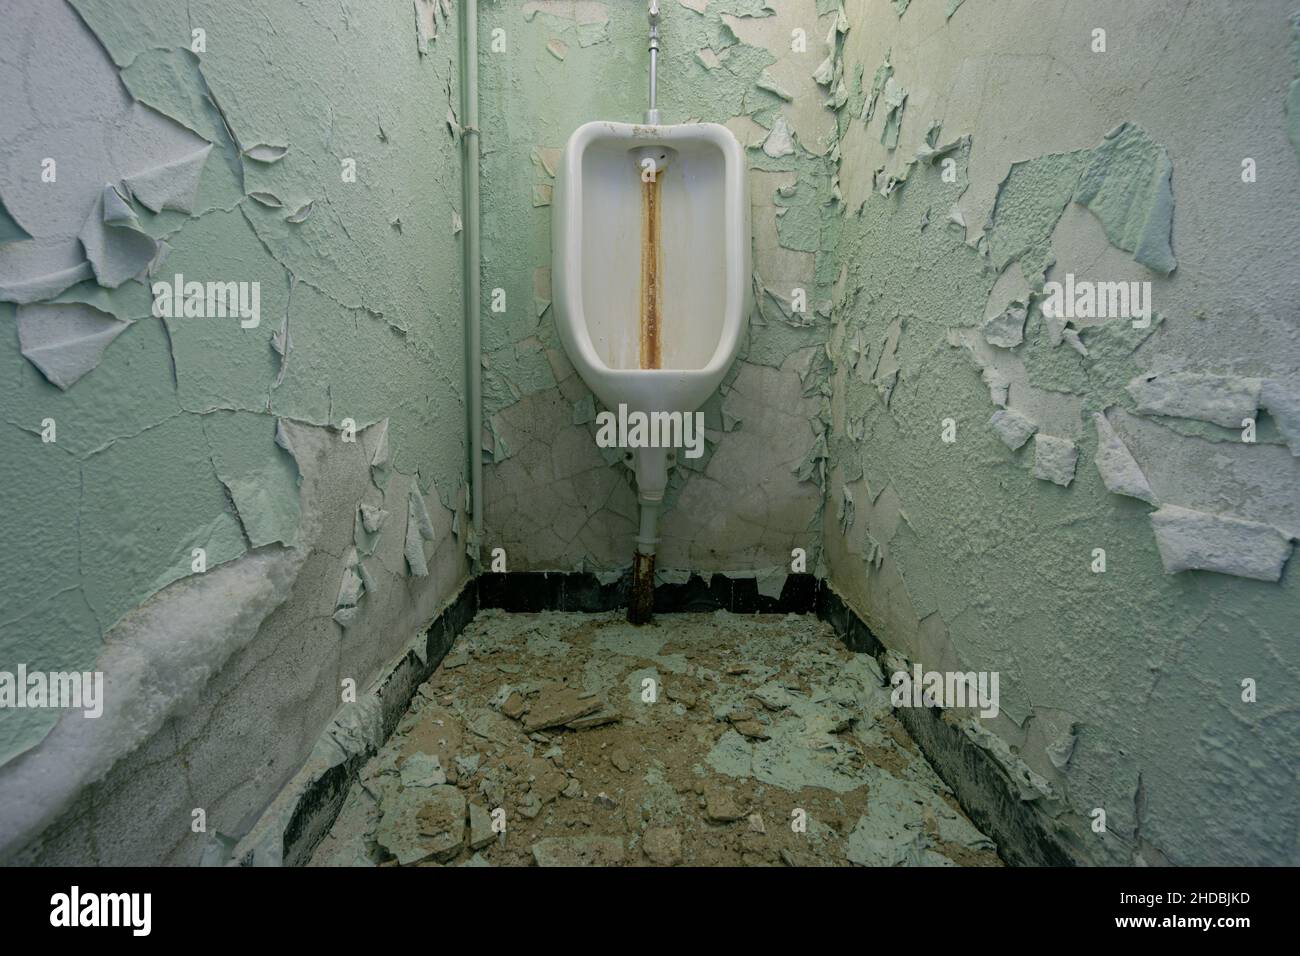 Old dirty disgusting toilet for men with grungy weathered cracked walls Stock Photo